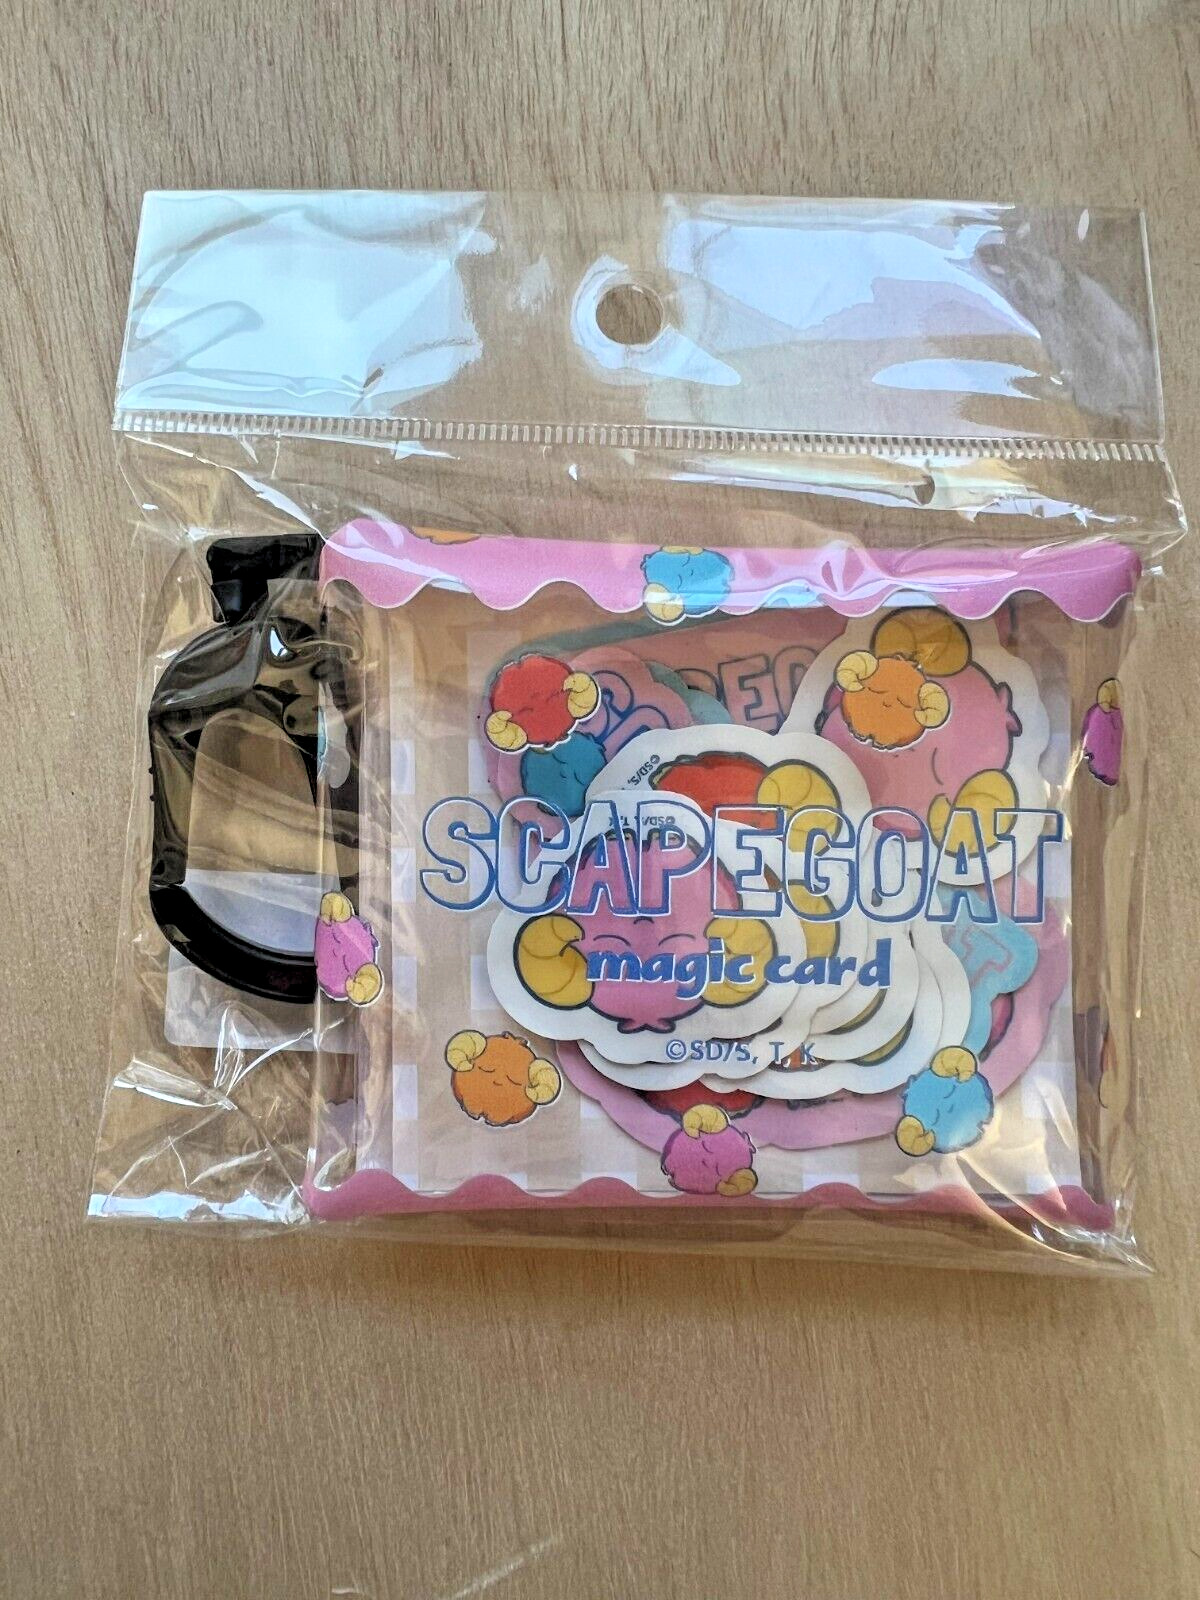 Yu-Gi-Oh Scapegoat Case/Coin Purse & Stickers -  Official OCG Merchandise